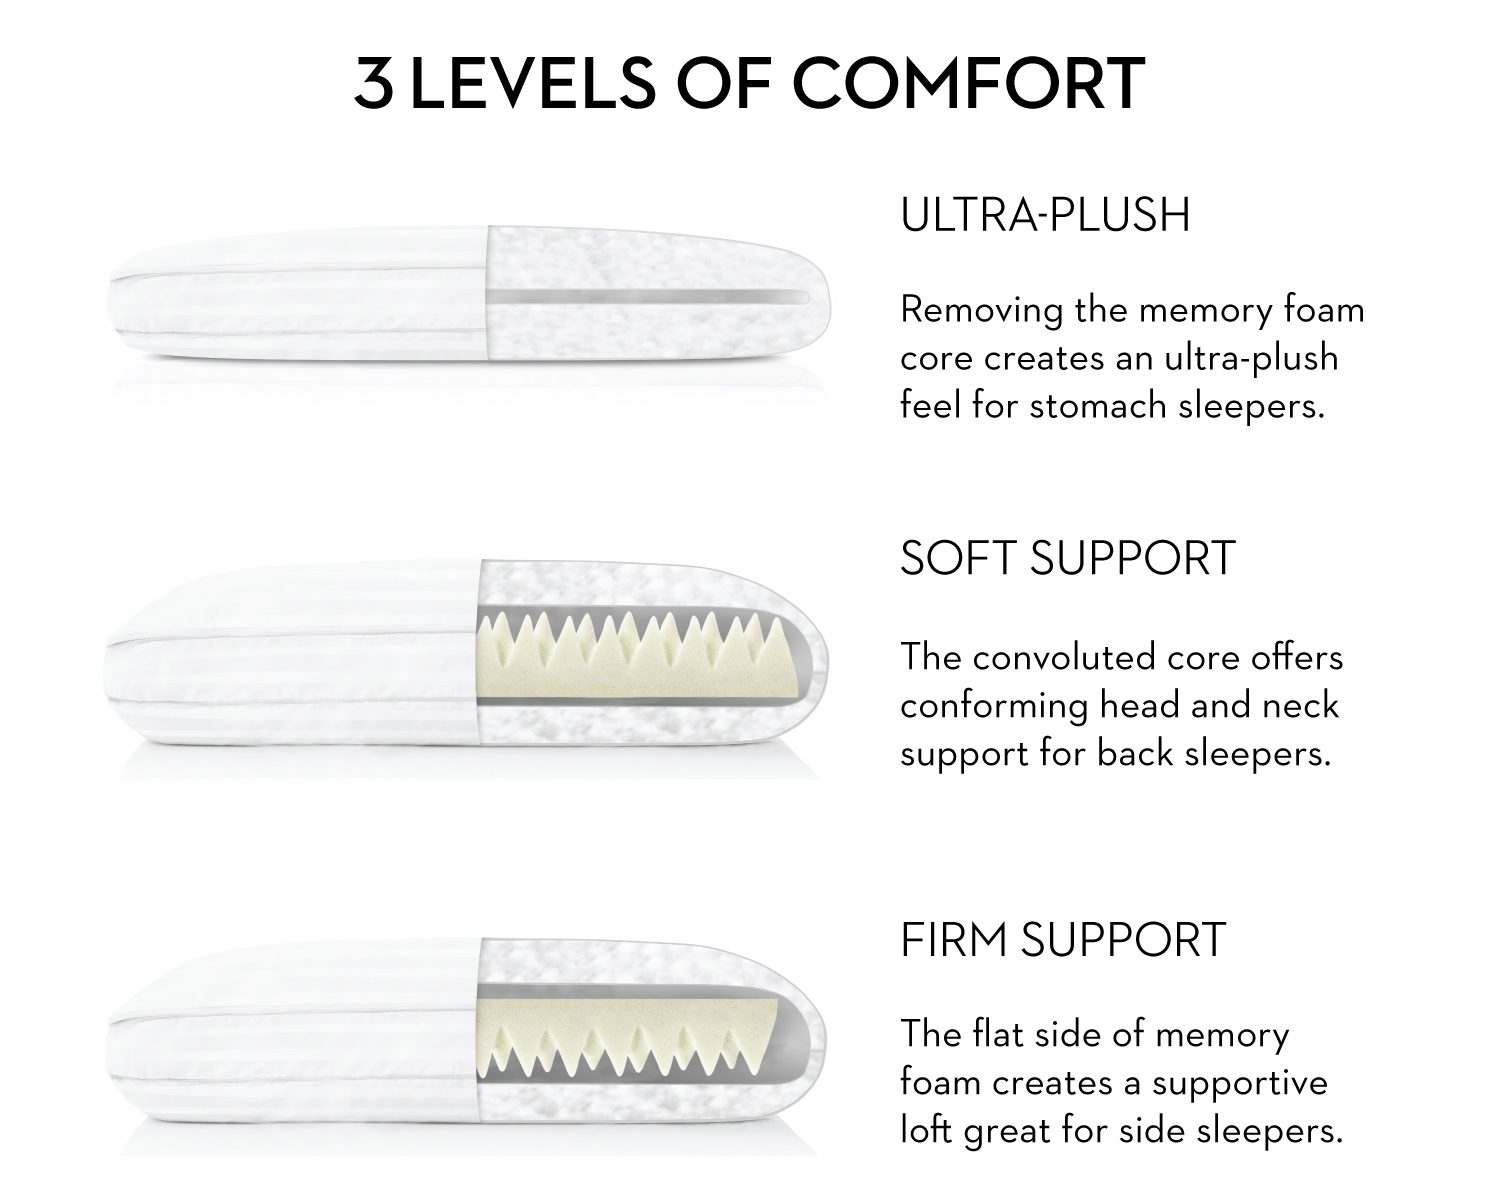 Three levels of comfort - ultra-plush, soft support and firm support